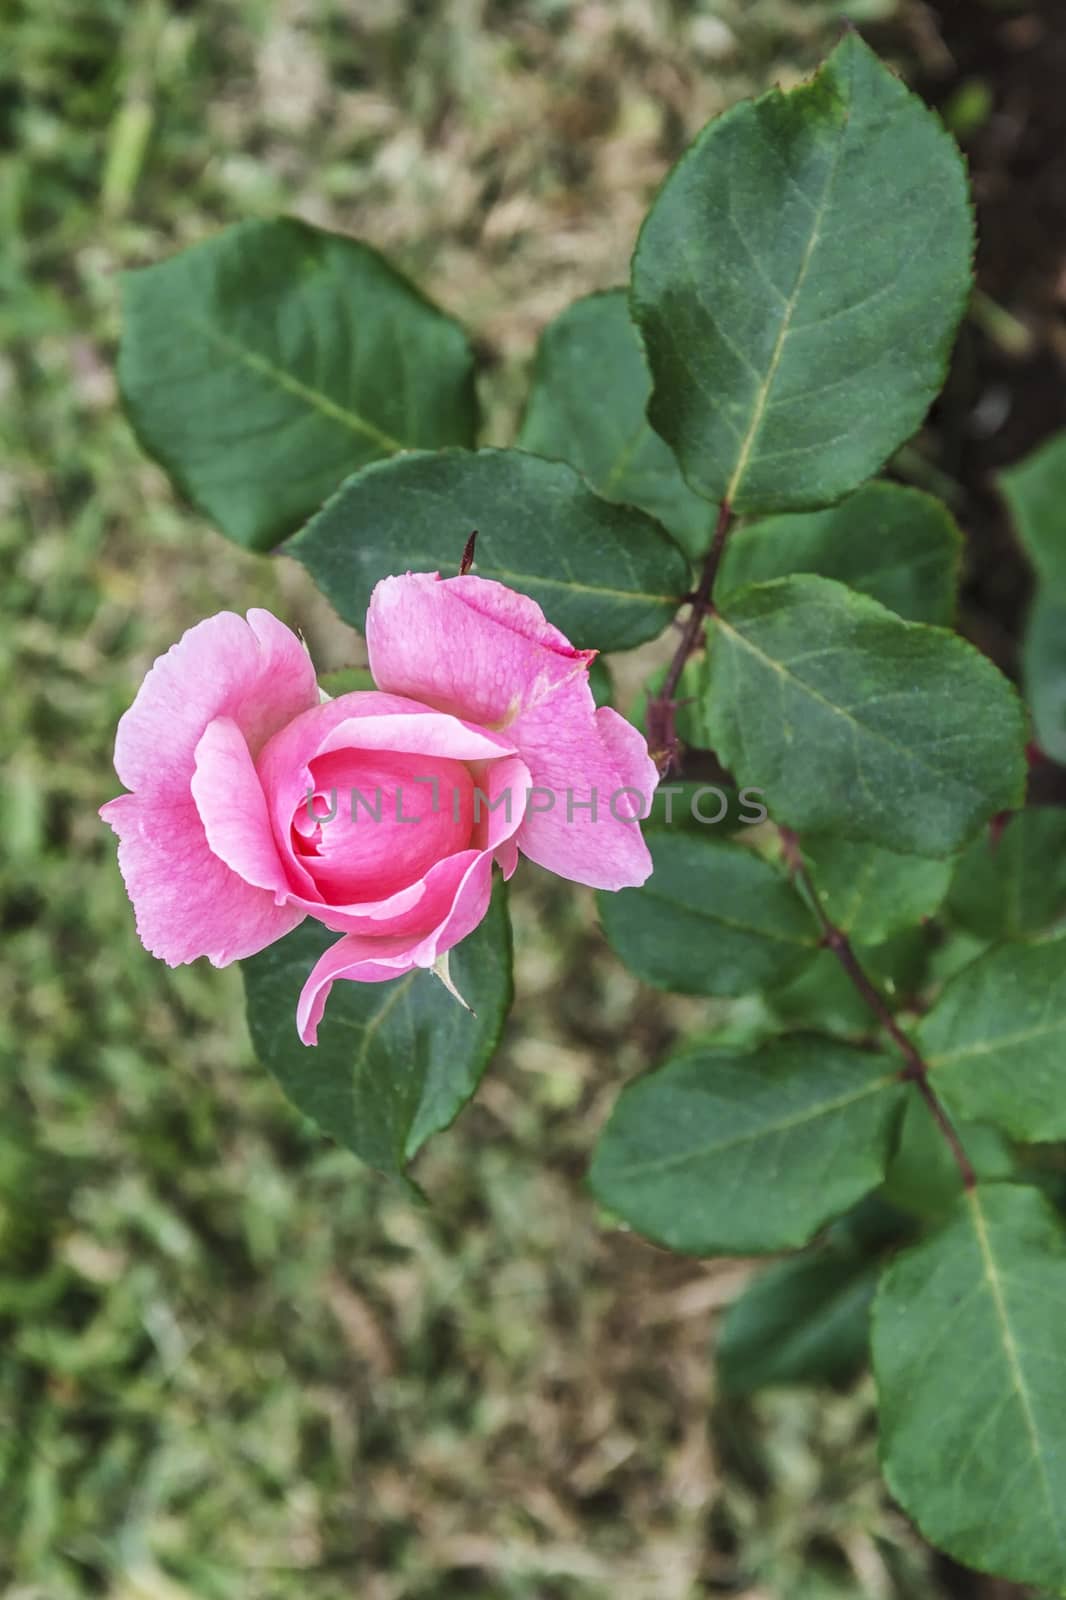 Rose bud on a stem with foliage, close-up, blurred background